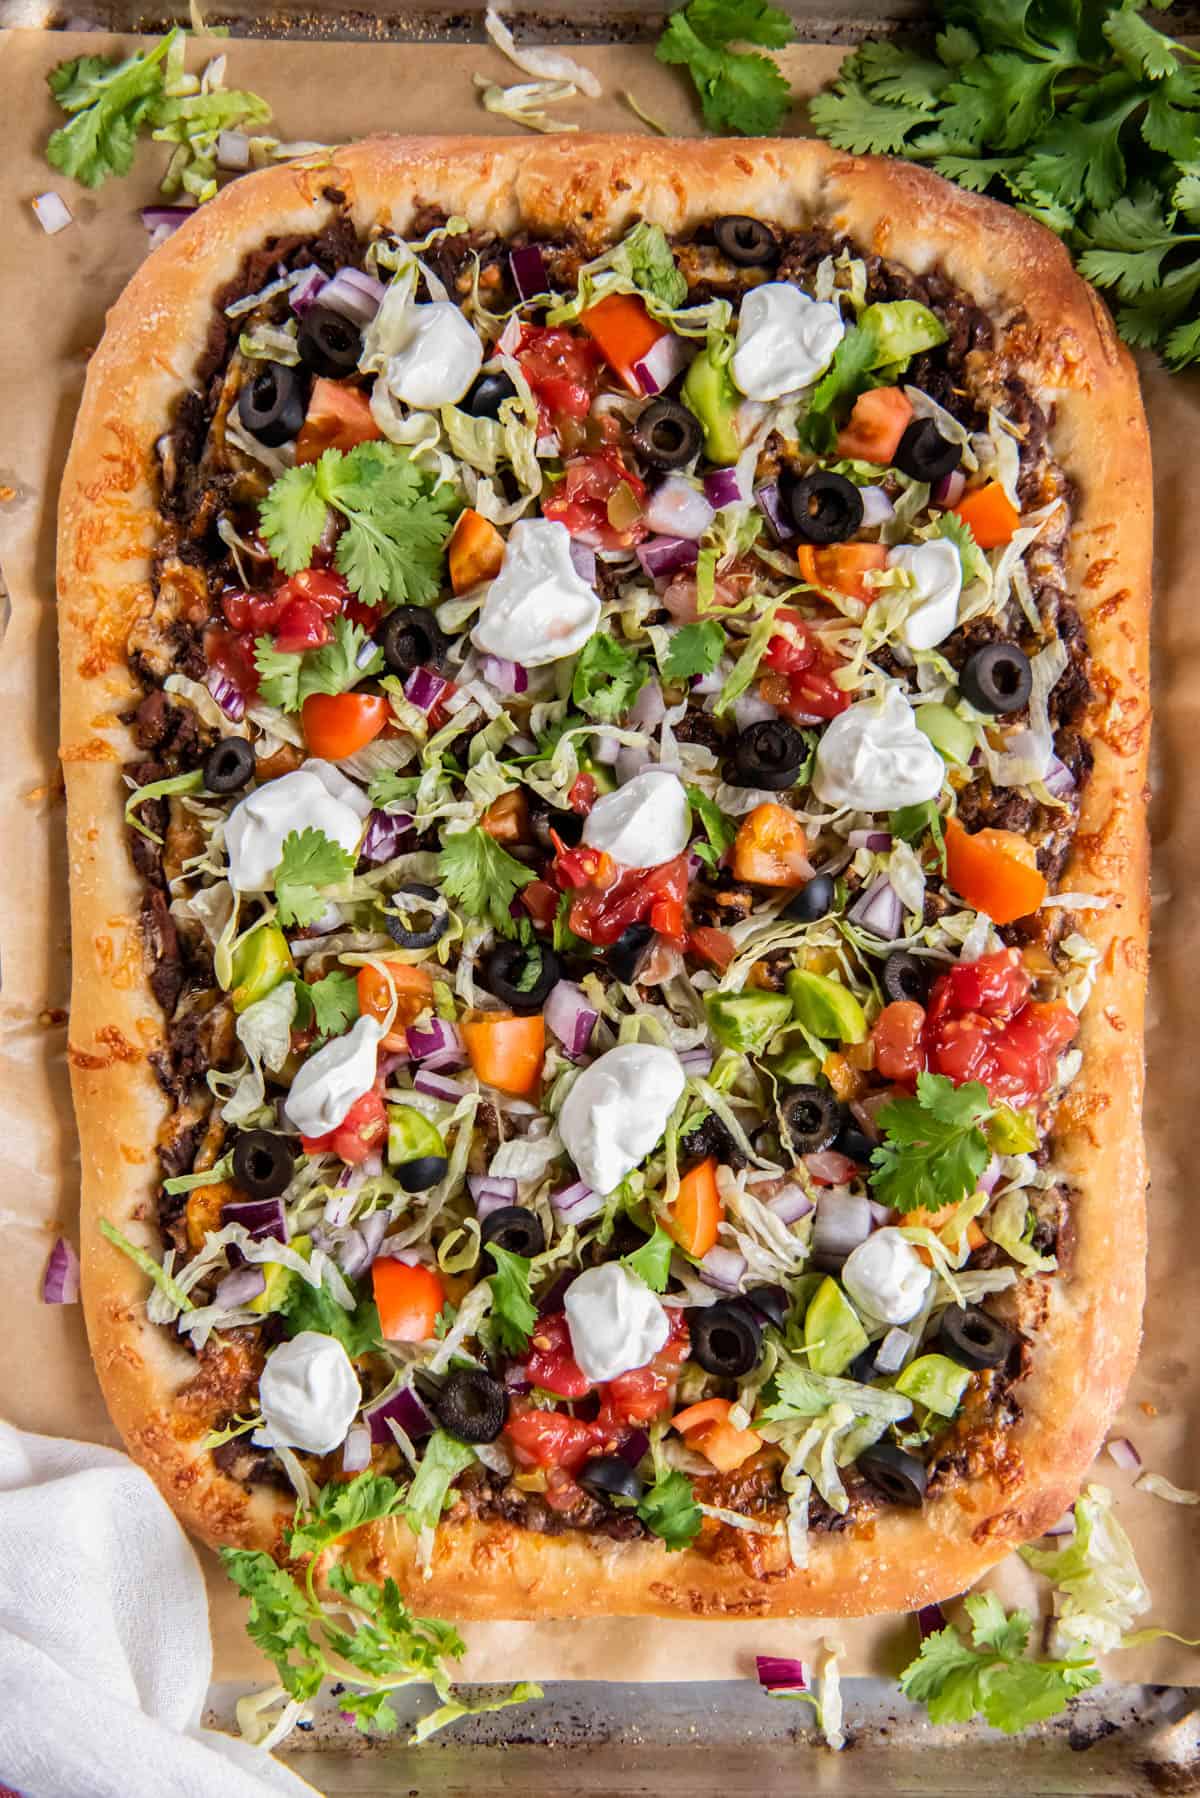 Homemade Taco Pizza on a piece of parchment paper on a baking sheet. The pizza is topped with chopped lettuce, tomatoes, green onions, black olives, salsa, cilantro and sour cream.